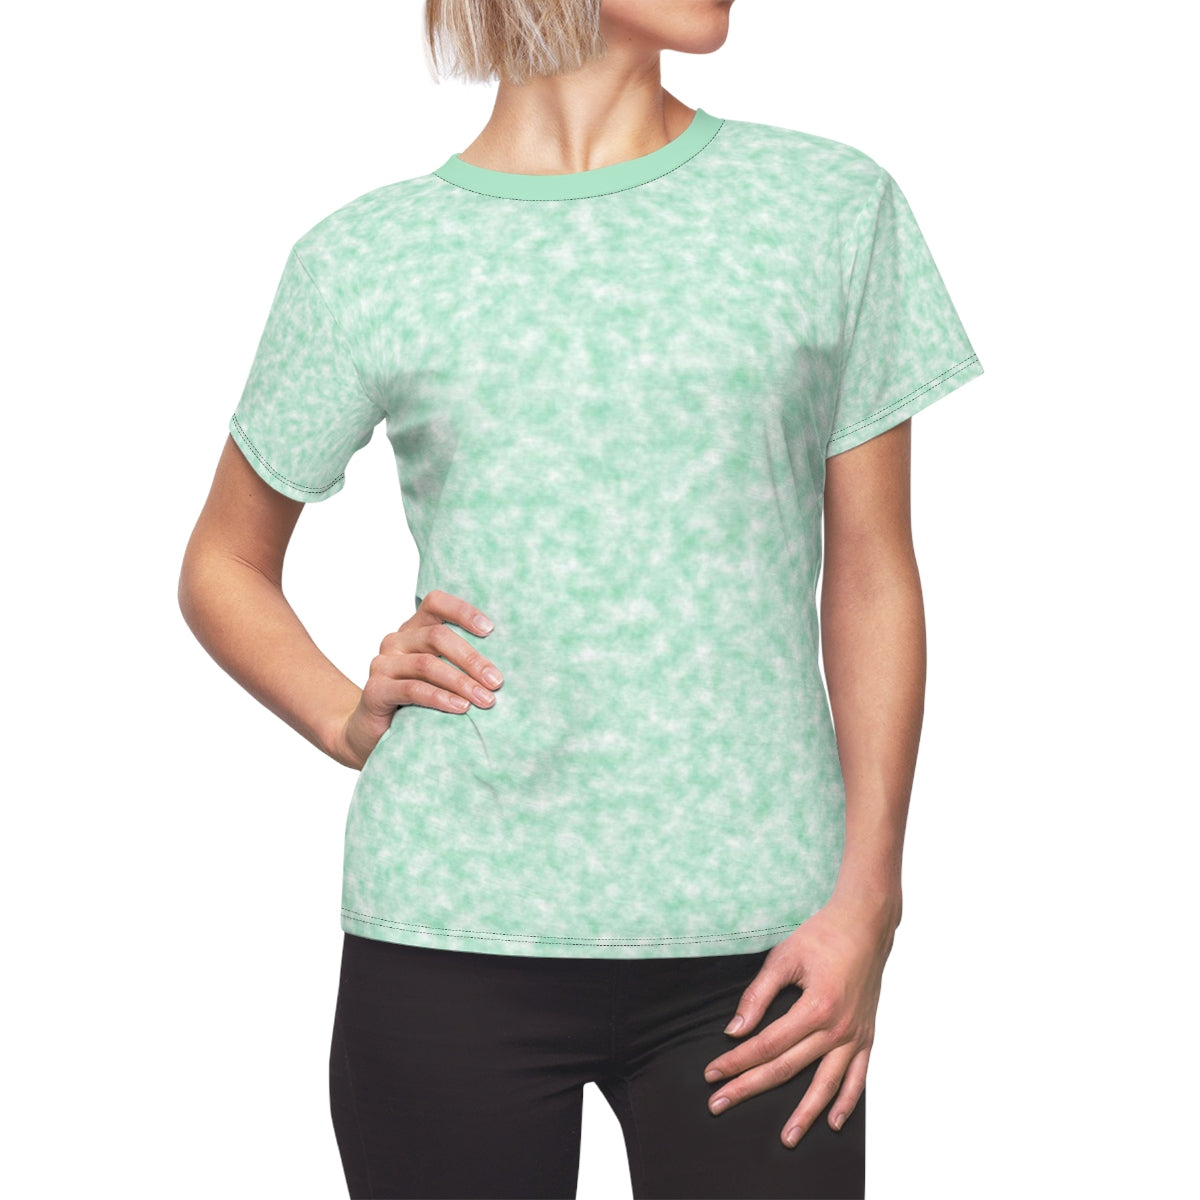 Seafoam Green and White Clouds Women's Tee